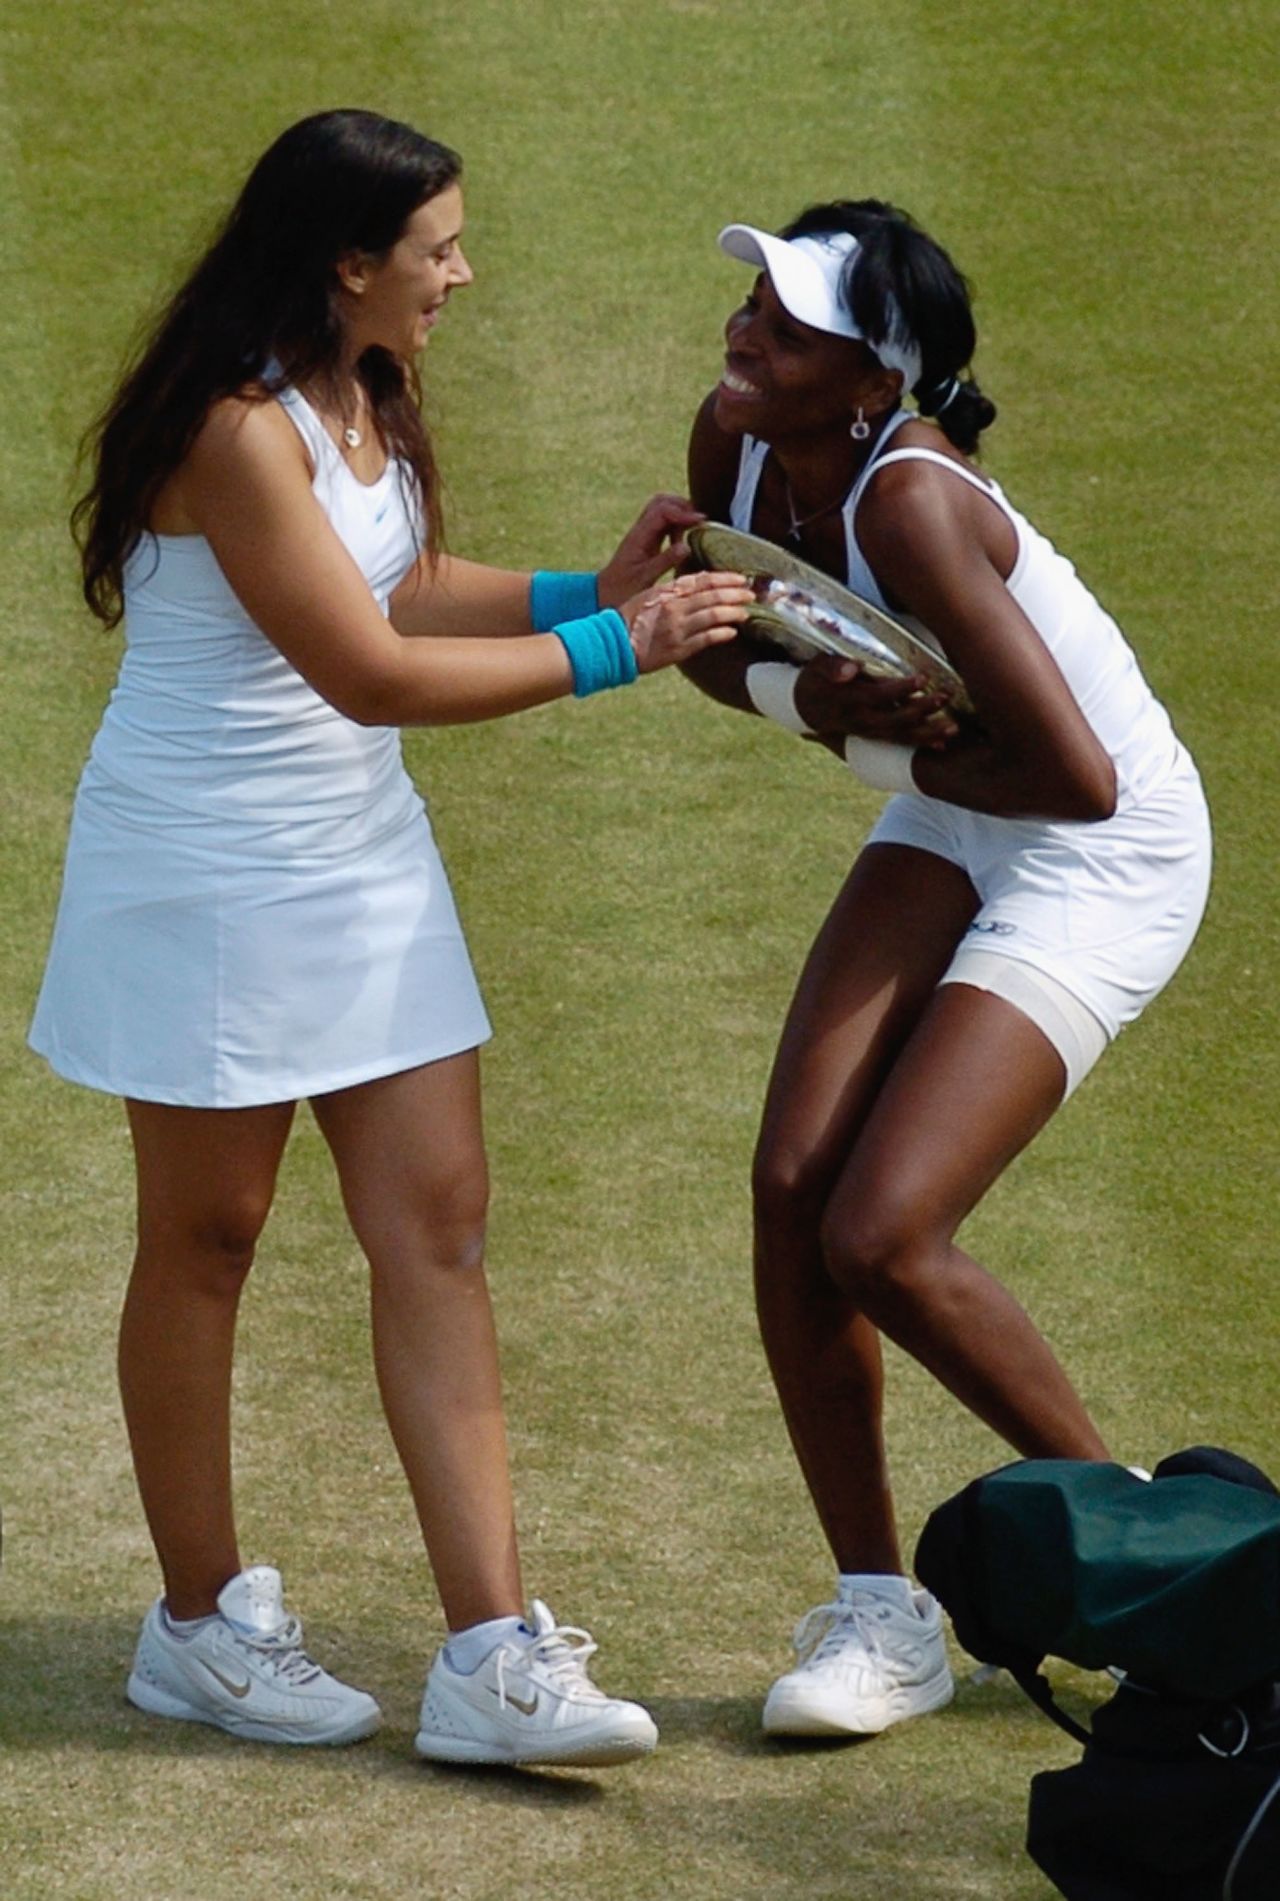 But it was Wimbledon where Bartoli made her name, losing in the 2007 final against Venus Williams (right) on the hallowed grass courts of the All-England Club.